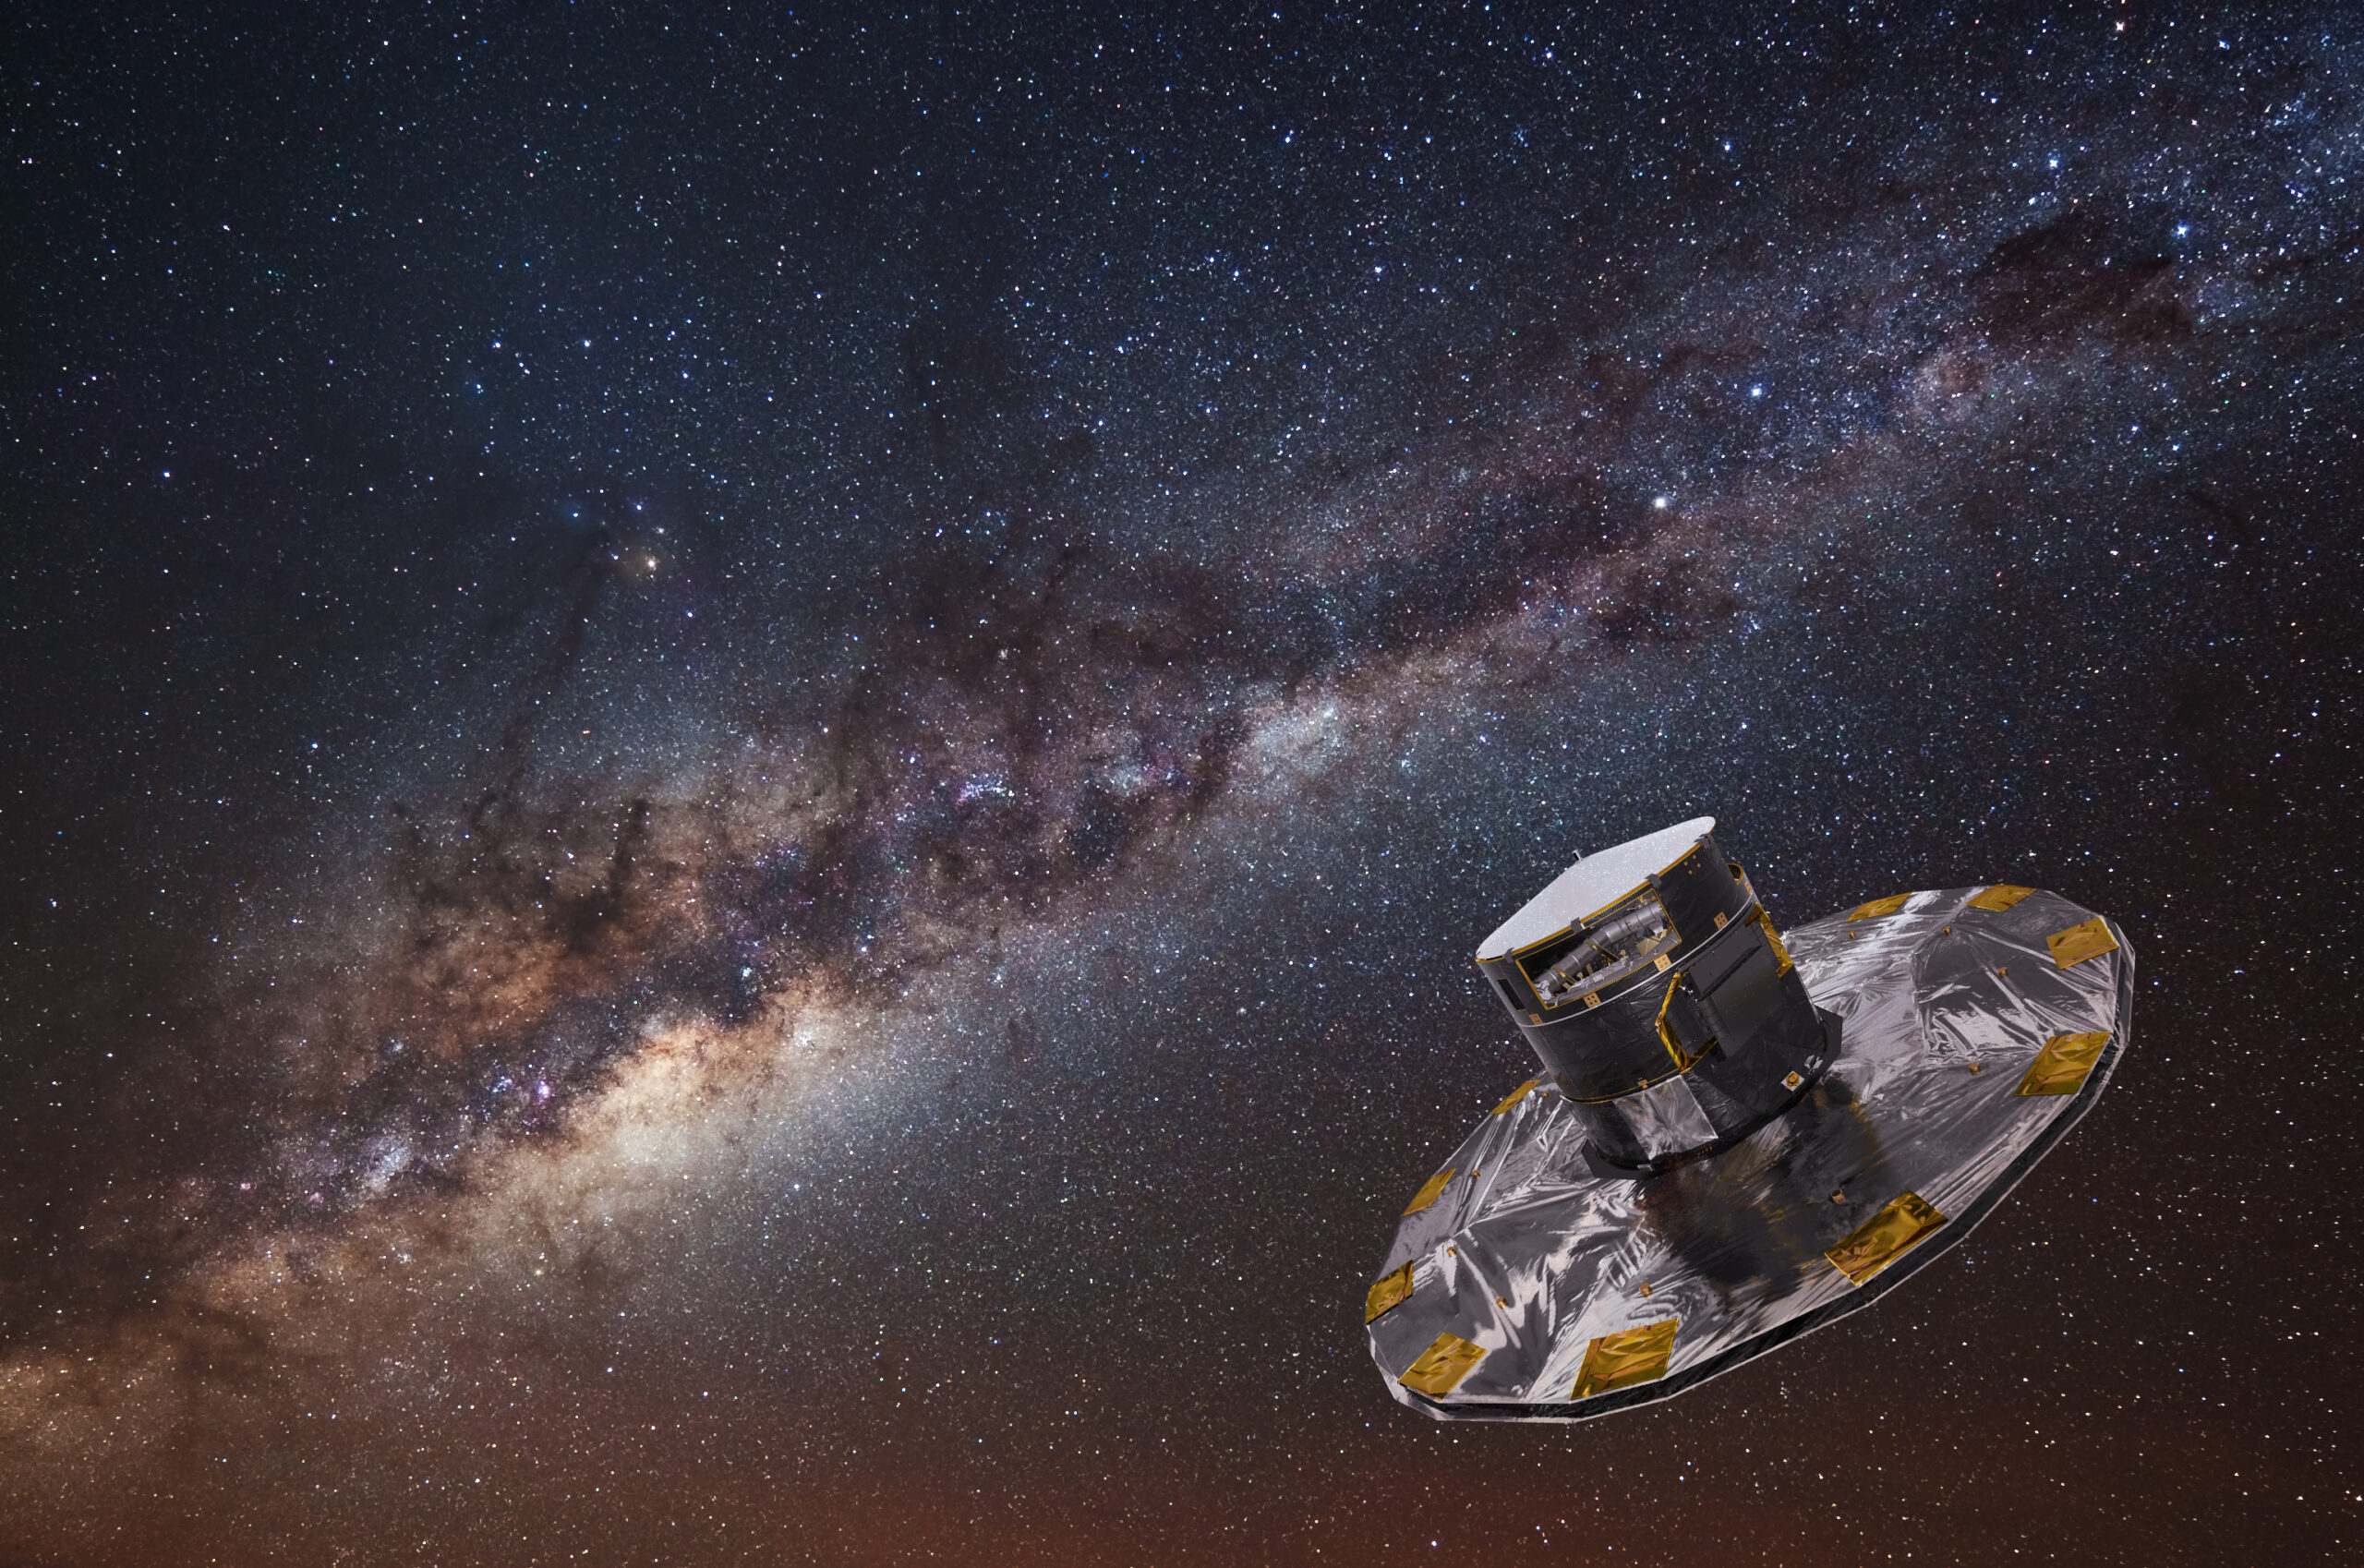 Next hit will be the last: Micrometeoroid pierced the hull of an $800 million space telescope